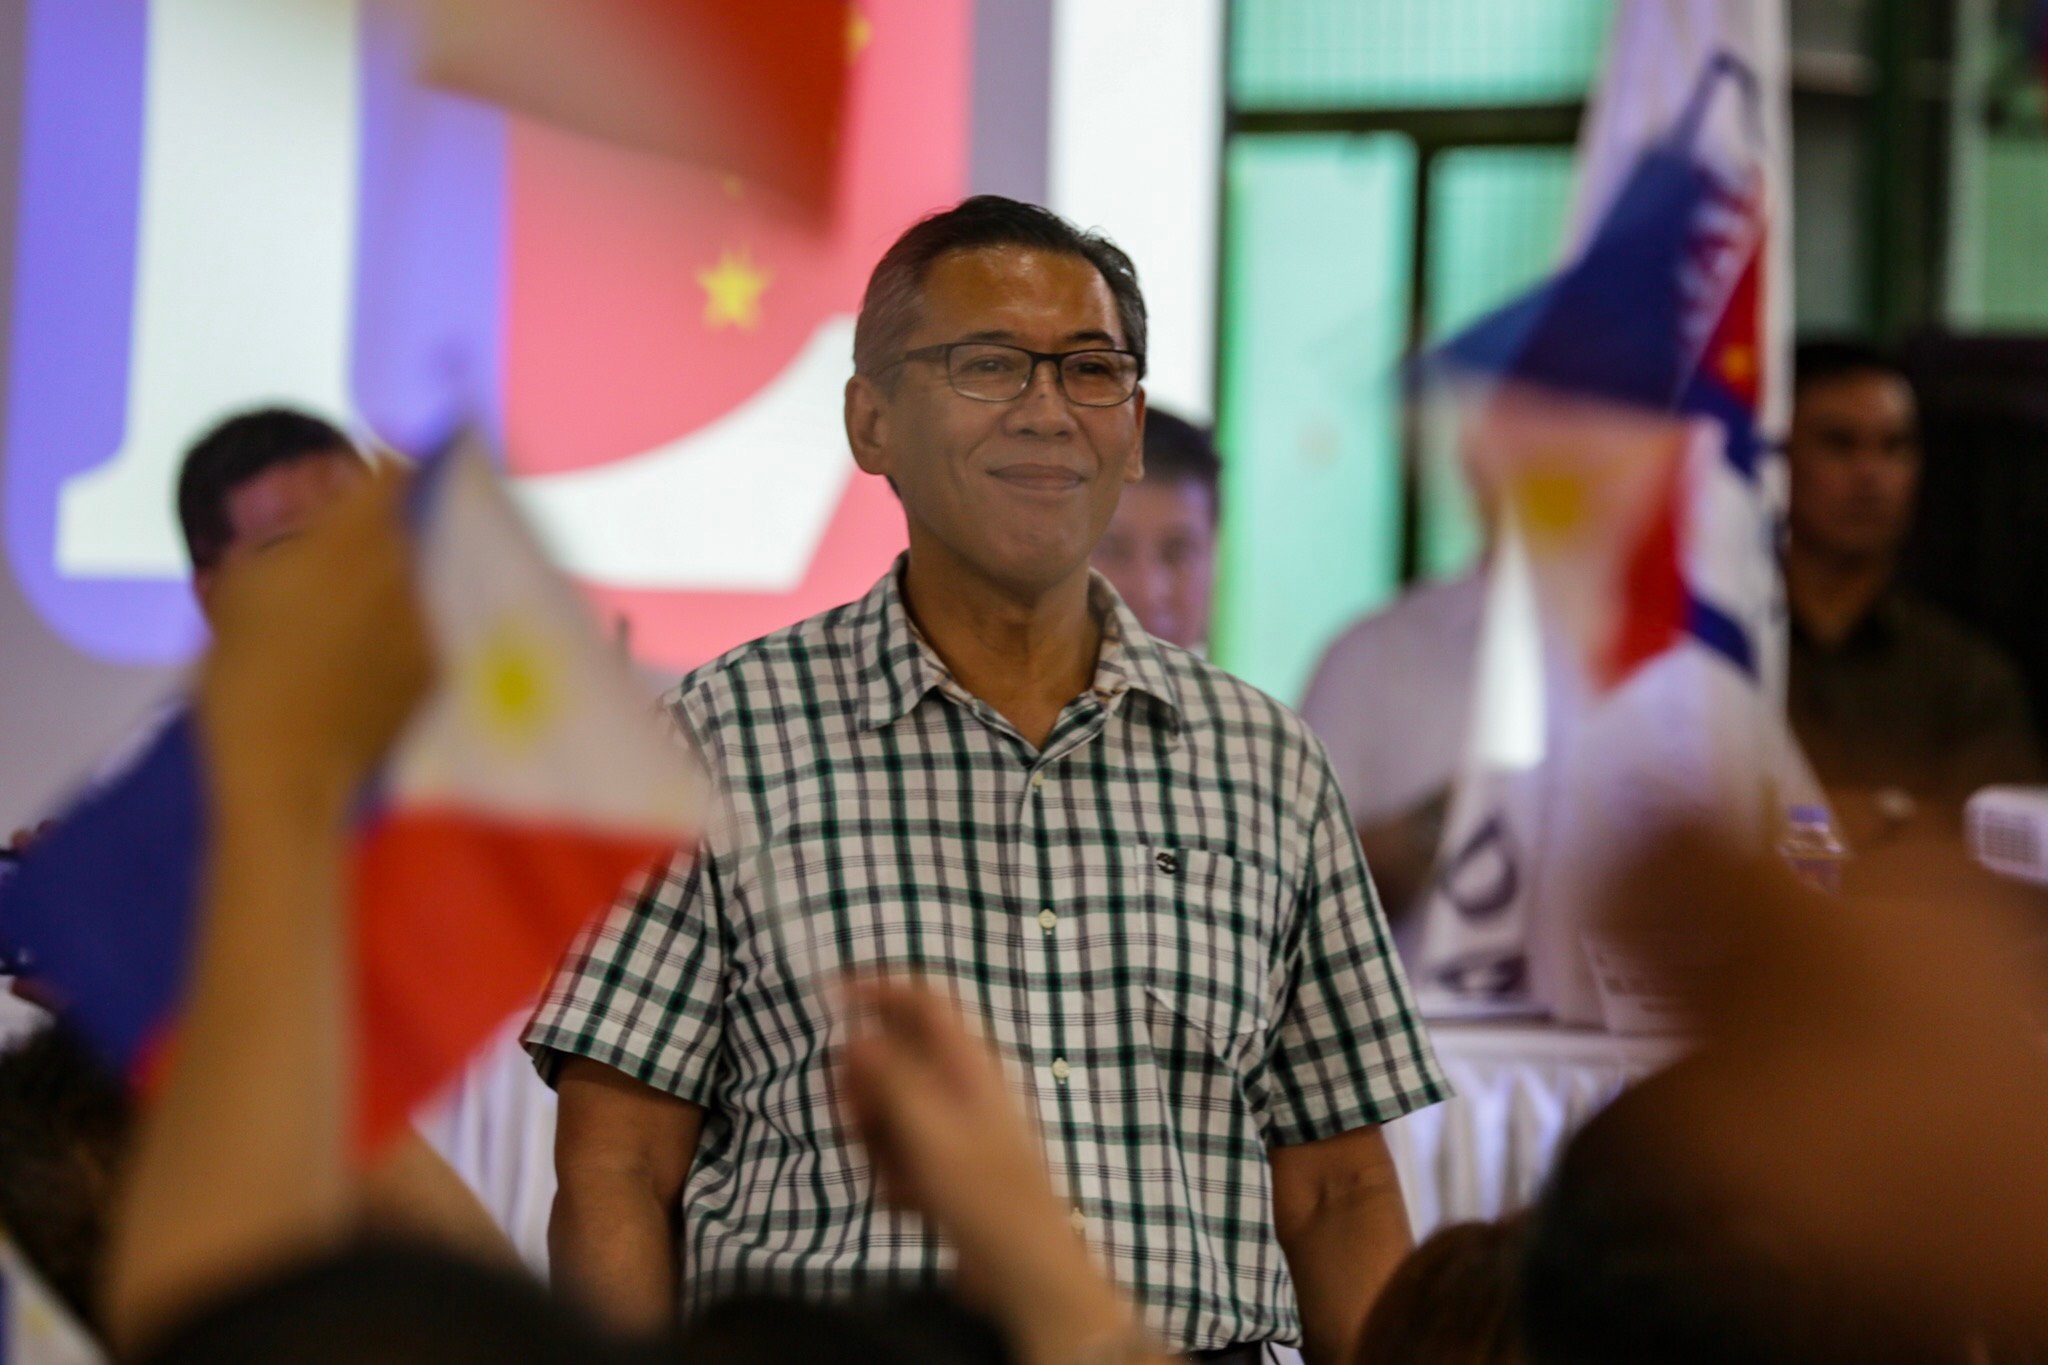 A NEW ARENA. Human rights lawyer Chel Diokno wants to bring the fight for rule of law to a different arena. Photo by Maria Tan/Rappler  